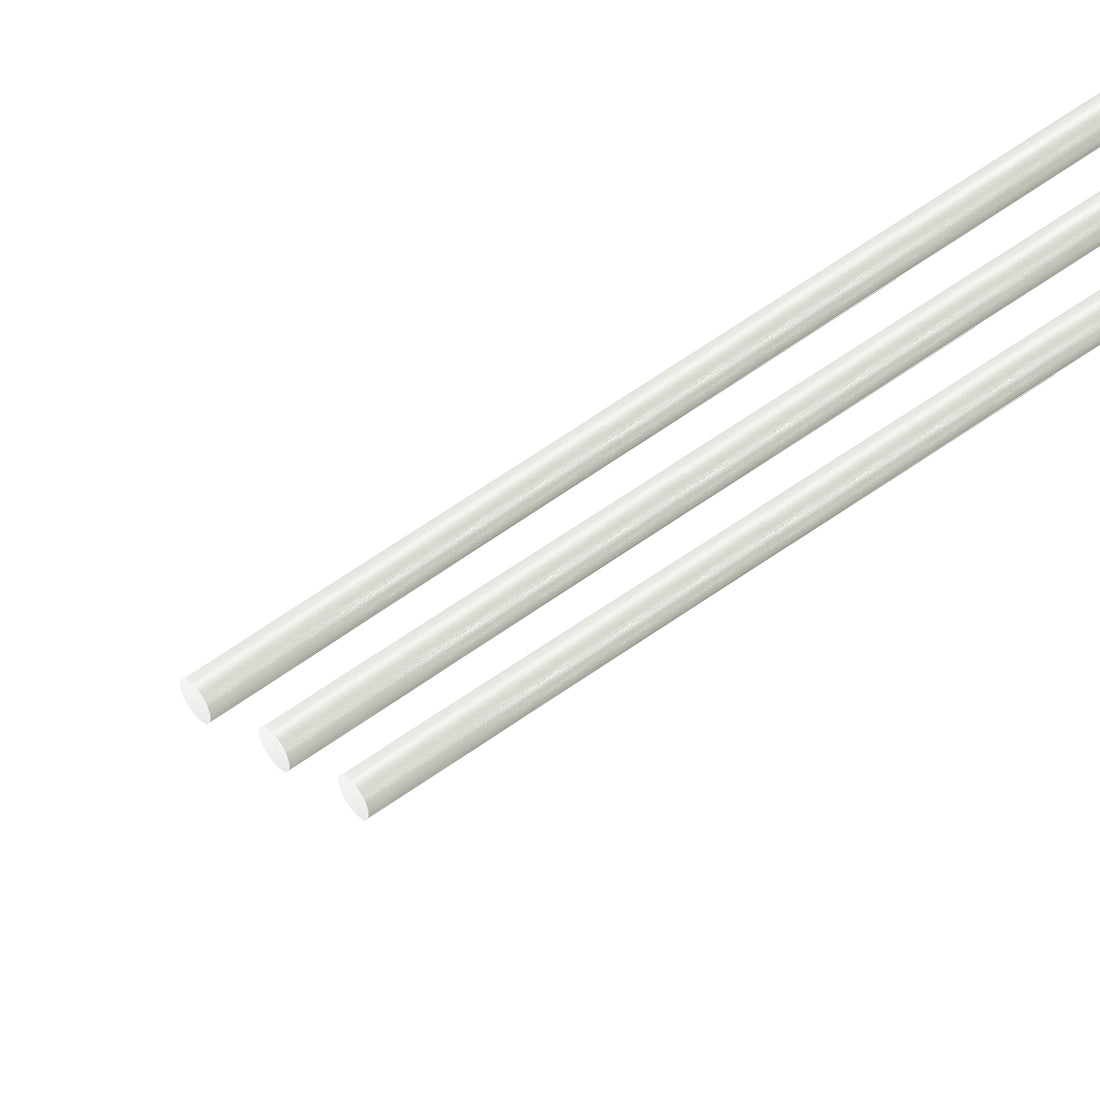 uxcell Uxcell FRP Fiberglass Round Rod,2.5mm Dia 50cm Long White Engineering Round Bars 3pcs